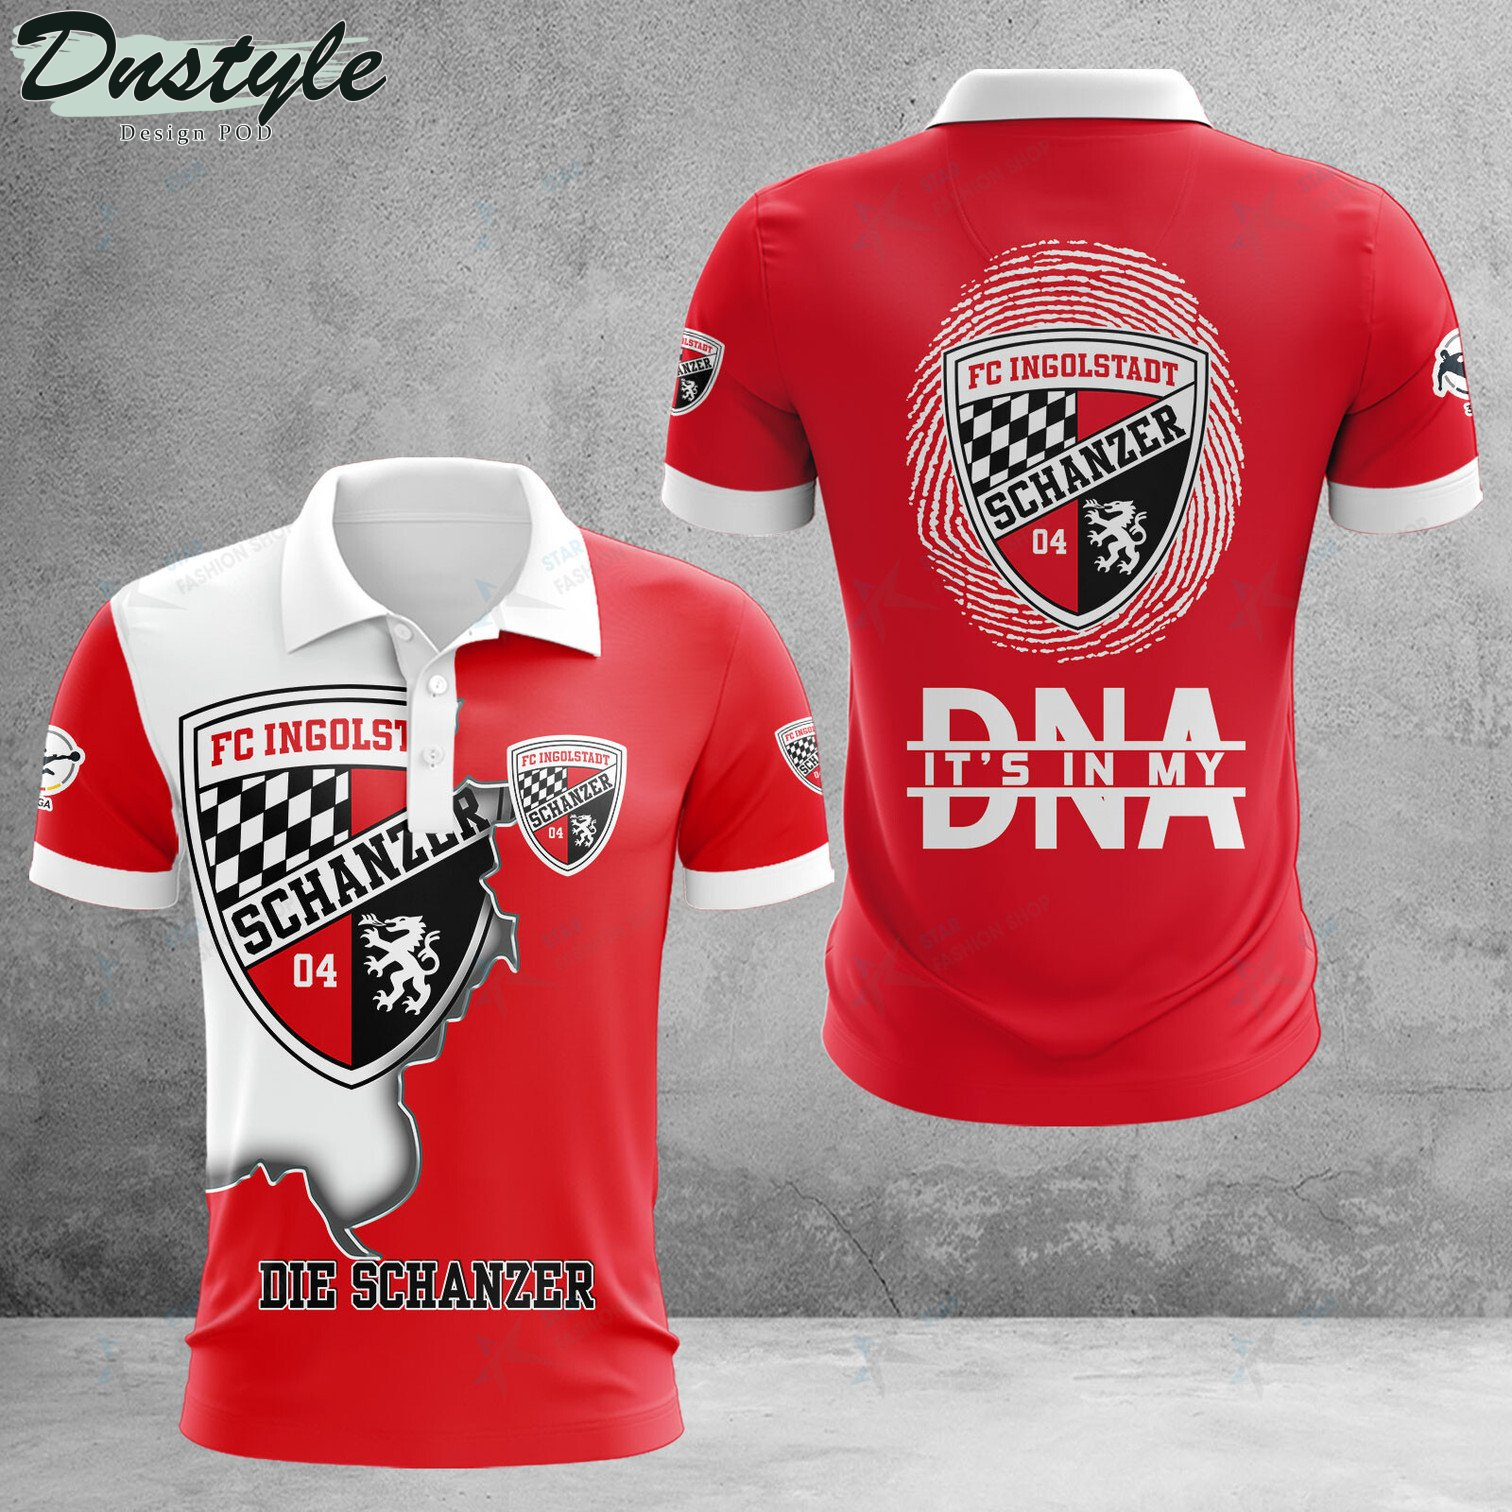 FC Ingolstadt it's in my DNA polo shirt